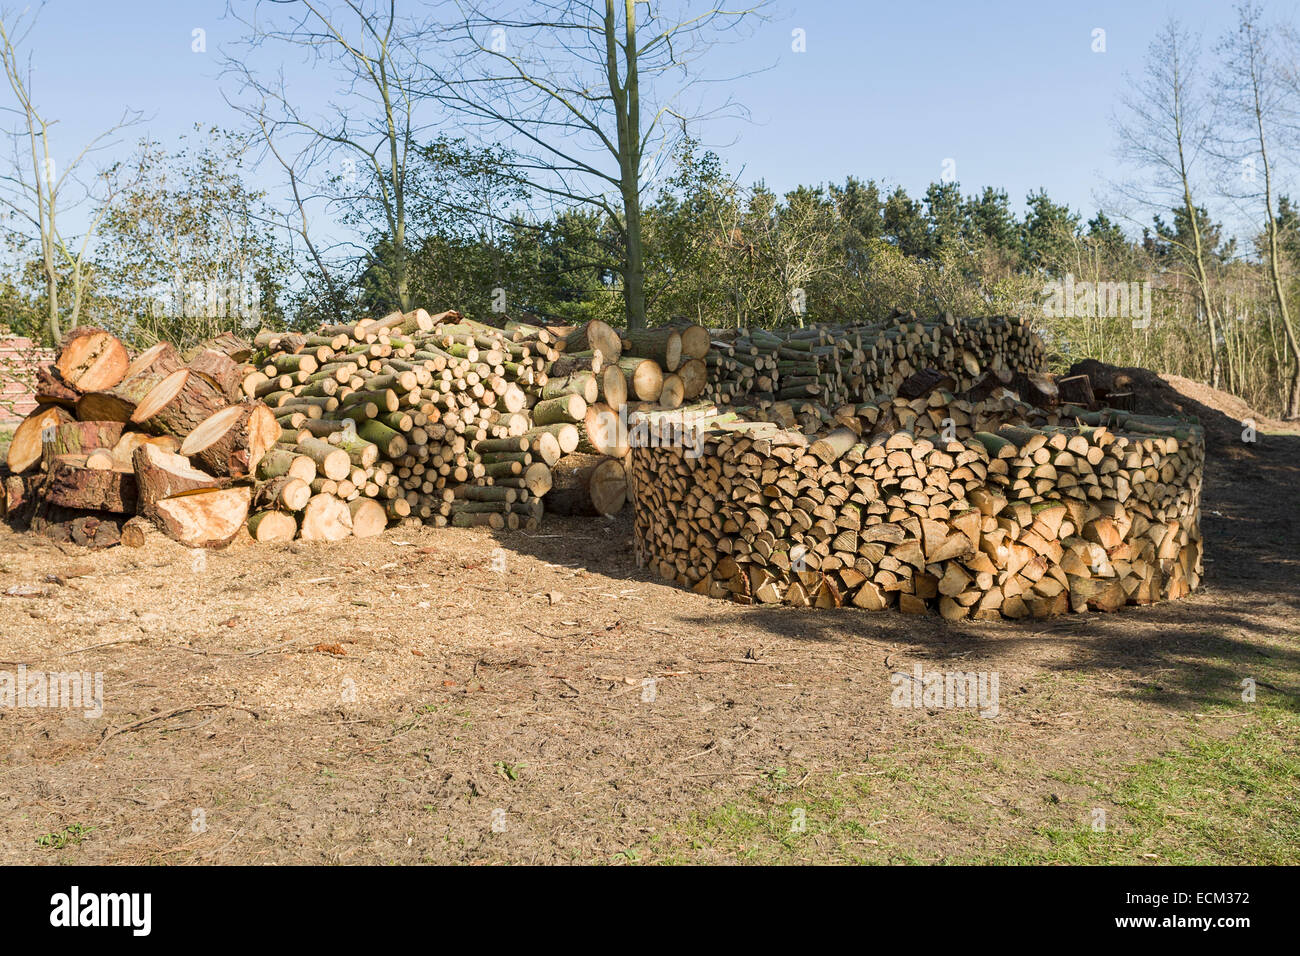 Building a Holz Hausen (Wood House) -  a method of stacking firewood to dry Stock Photo